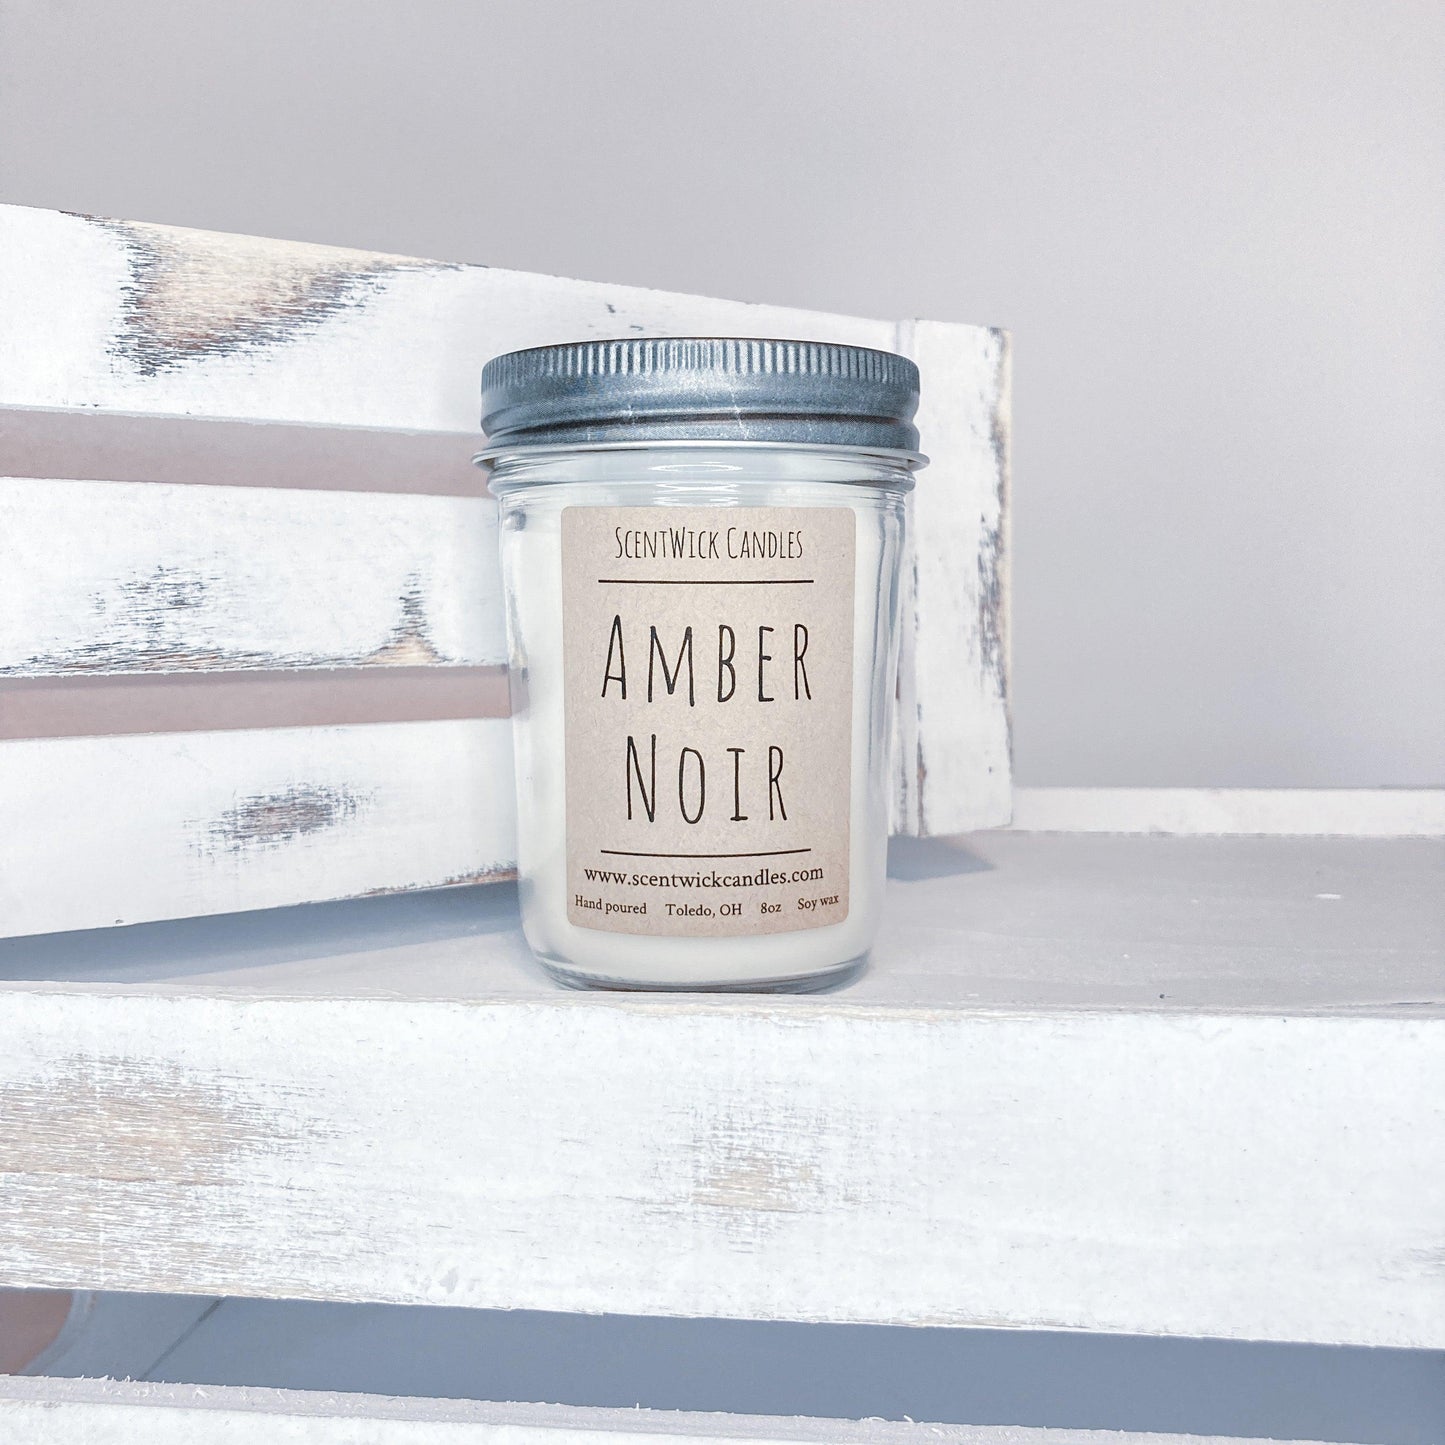 Amber Noir handmade soy candle in 8 oz glass jar. Made by ScentWick Candles Toledo Ohio